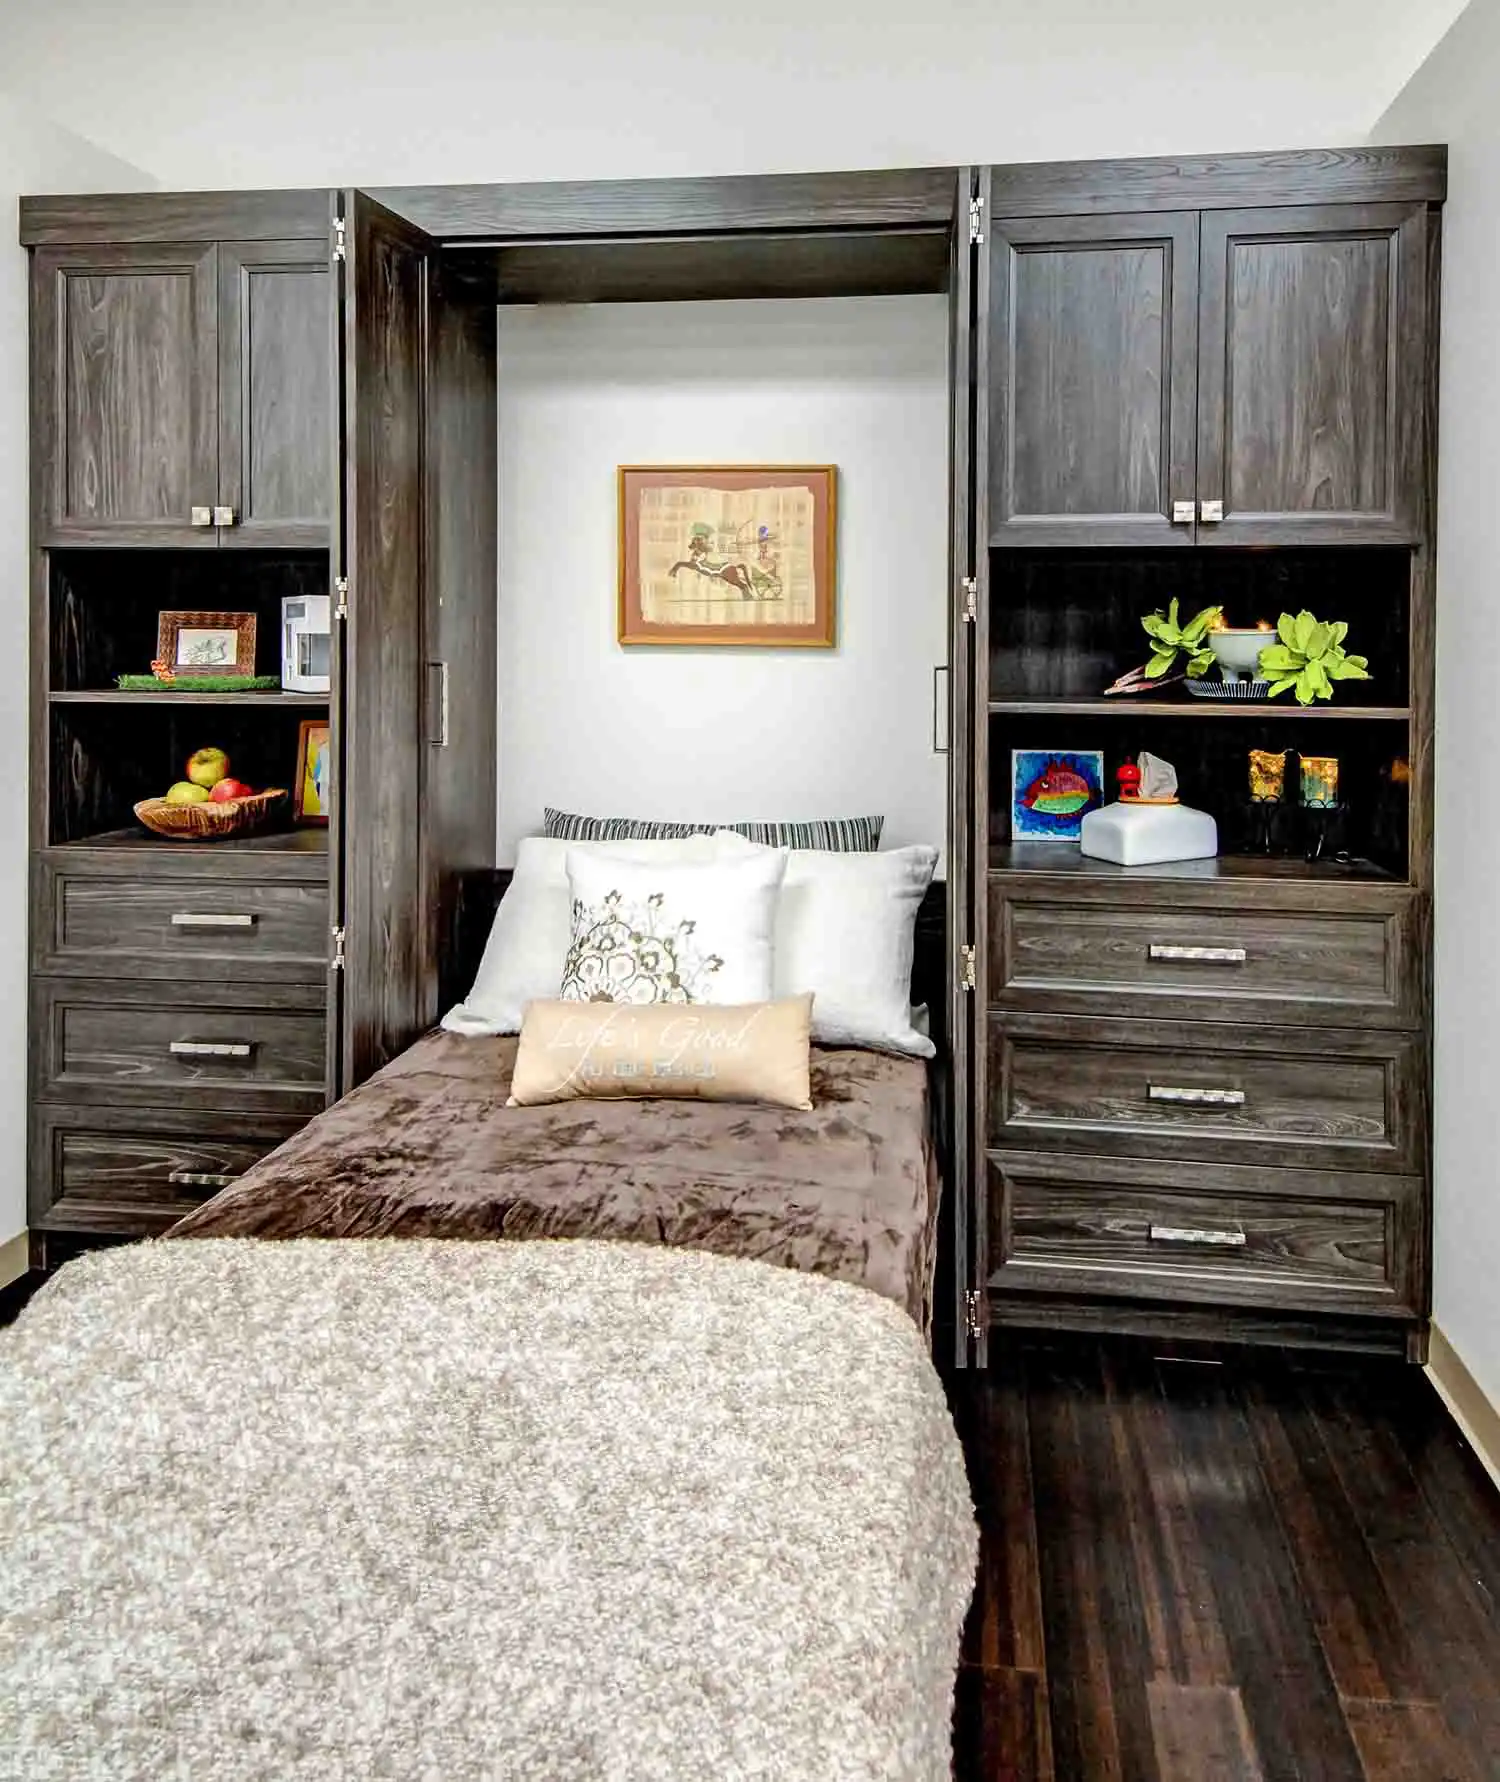 How Much Does a Murphy Bed Cost?